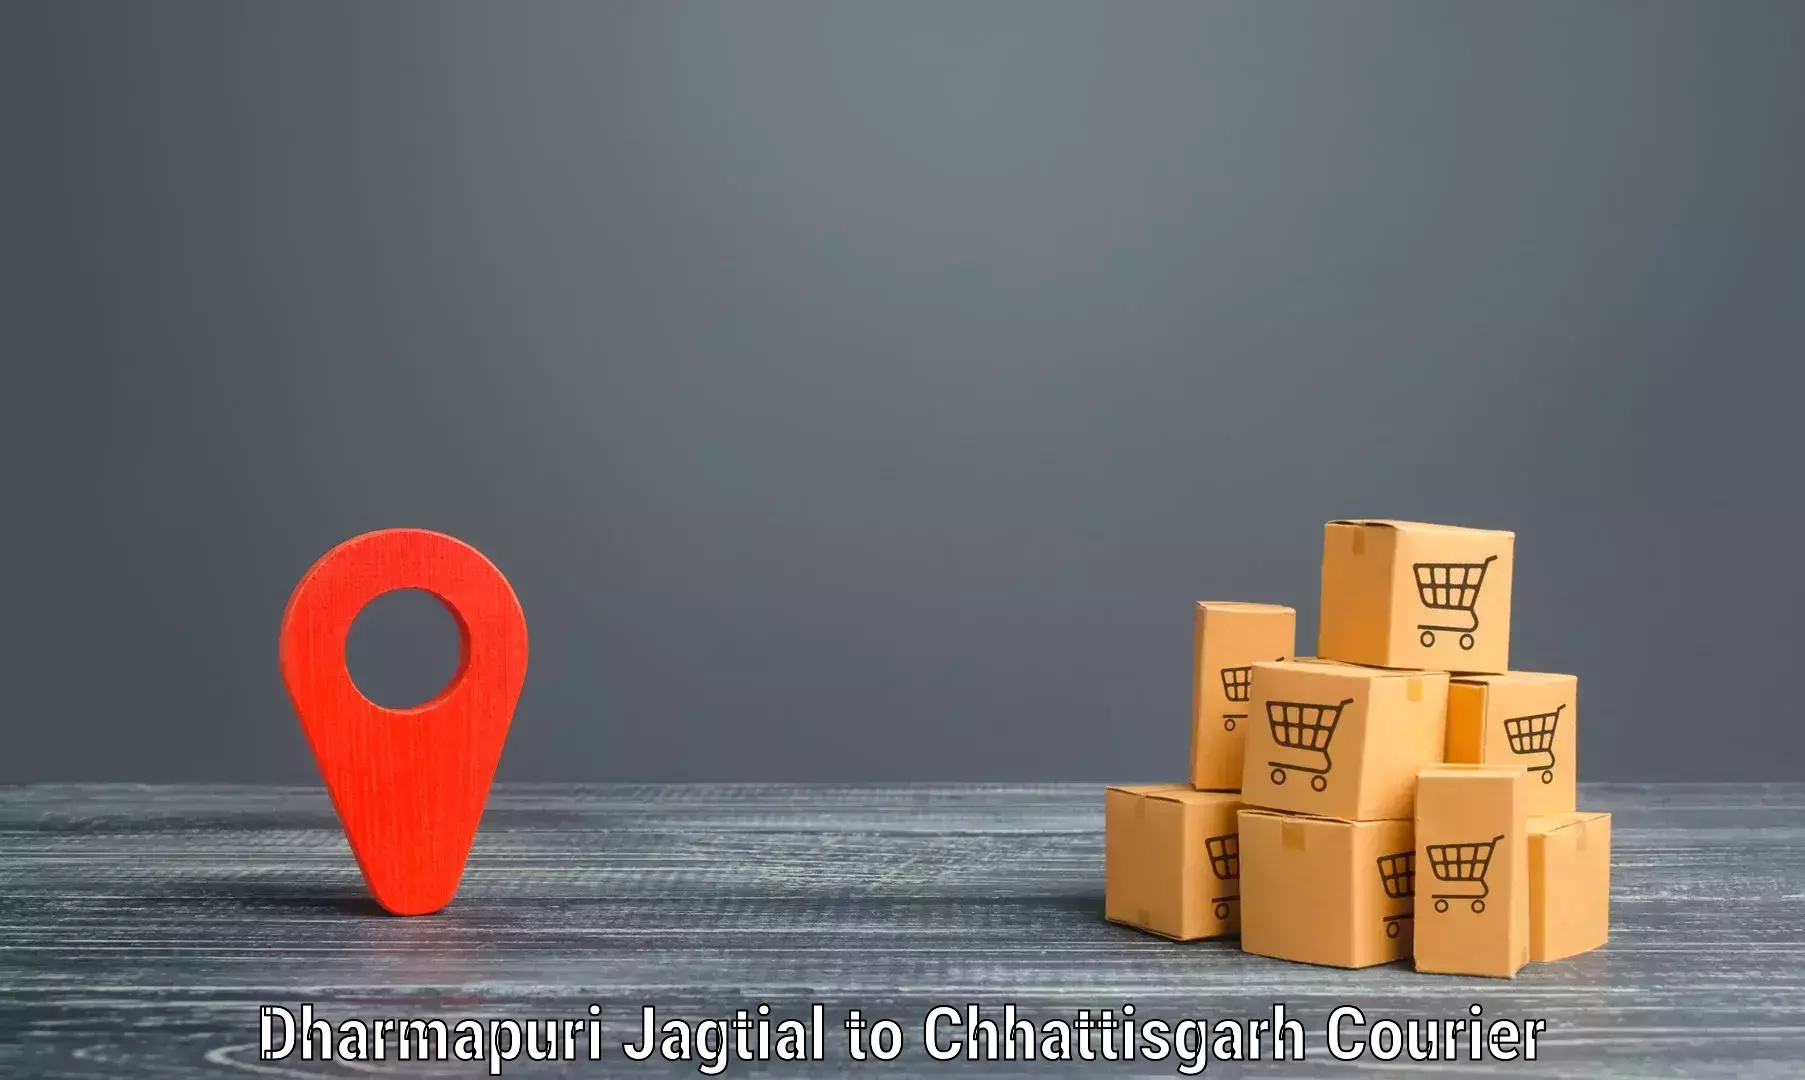 Express delivery solutions Dharmapuri Jagtial to Patna Chhattisgarh